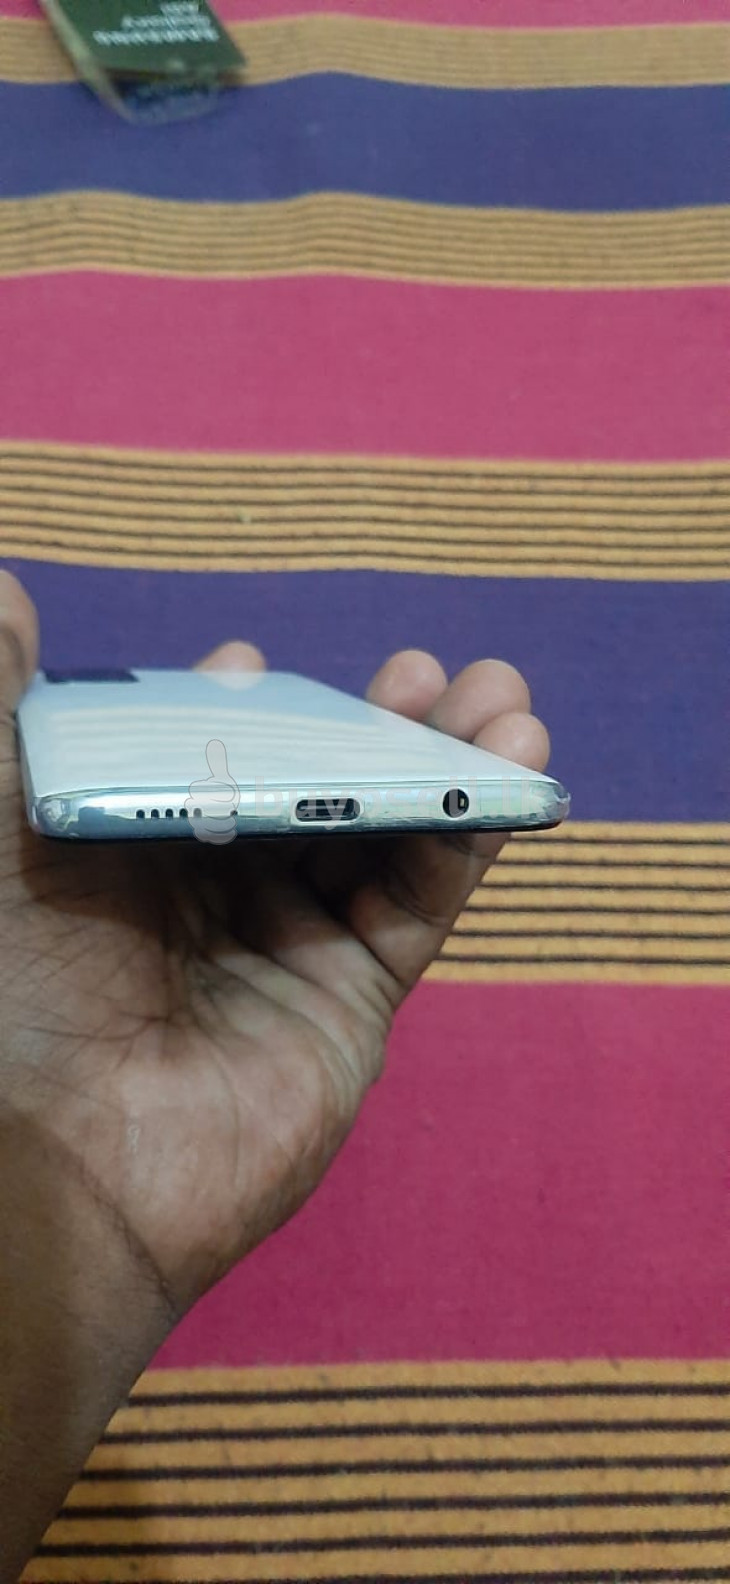 Samsung Galaxy A51 (Used) for sale in Colombo